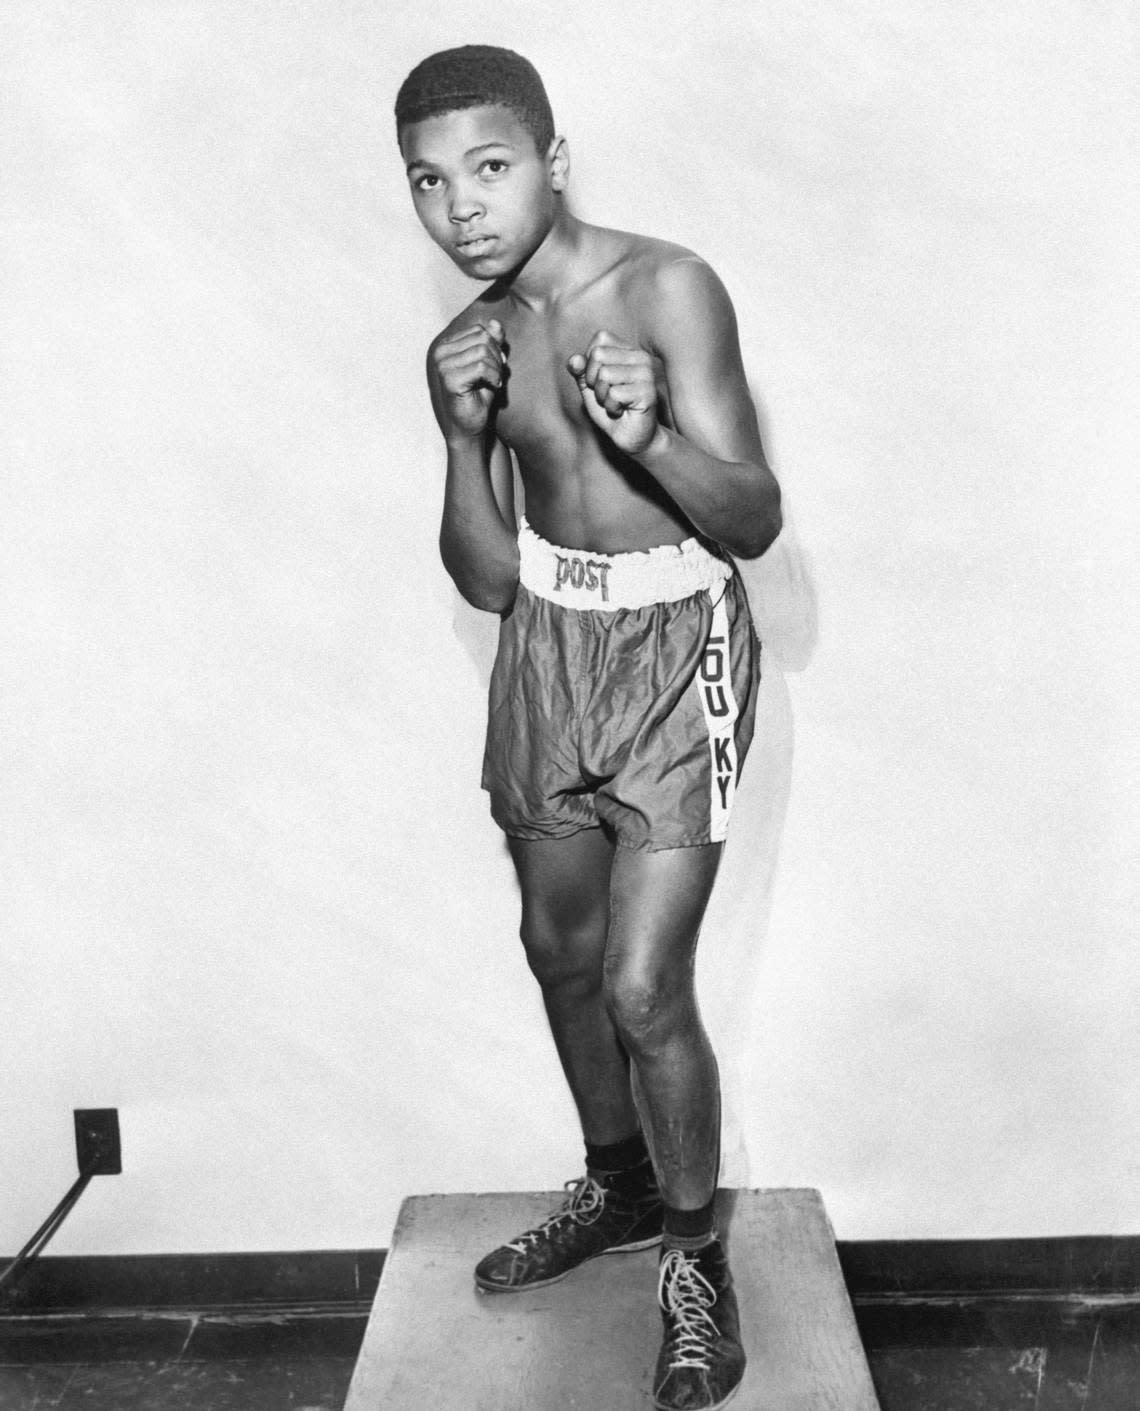 At 12-years old Cassius Clay (later Muhammad Ali) shows his best pugilist stance.